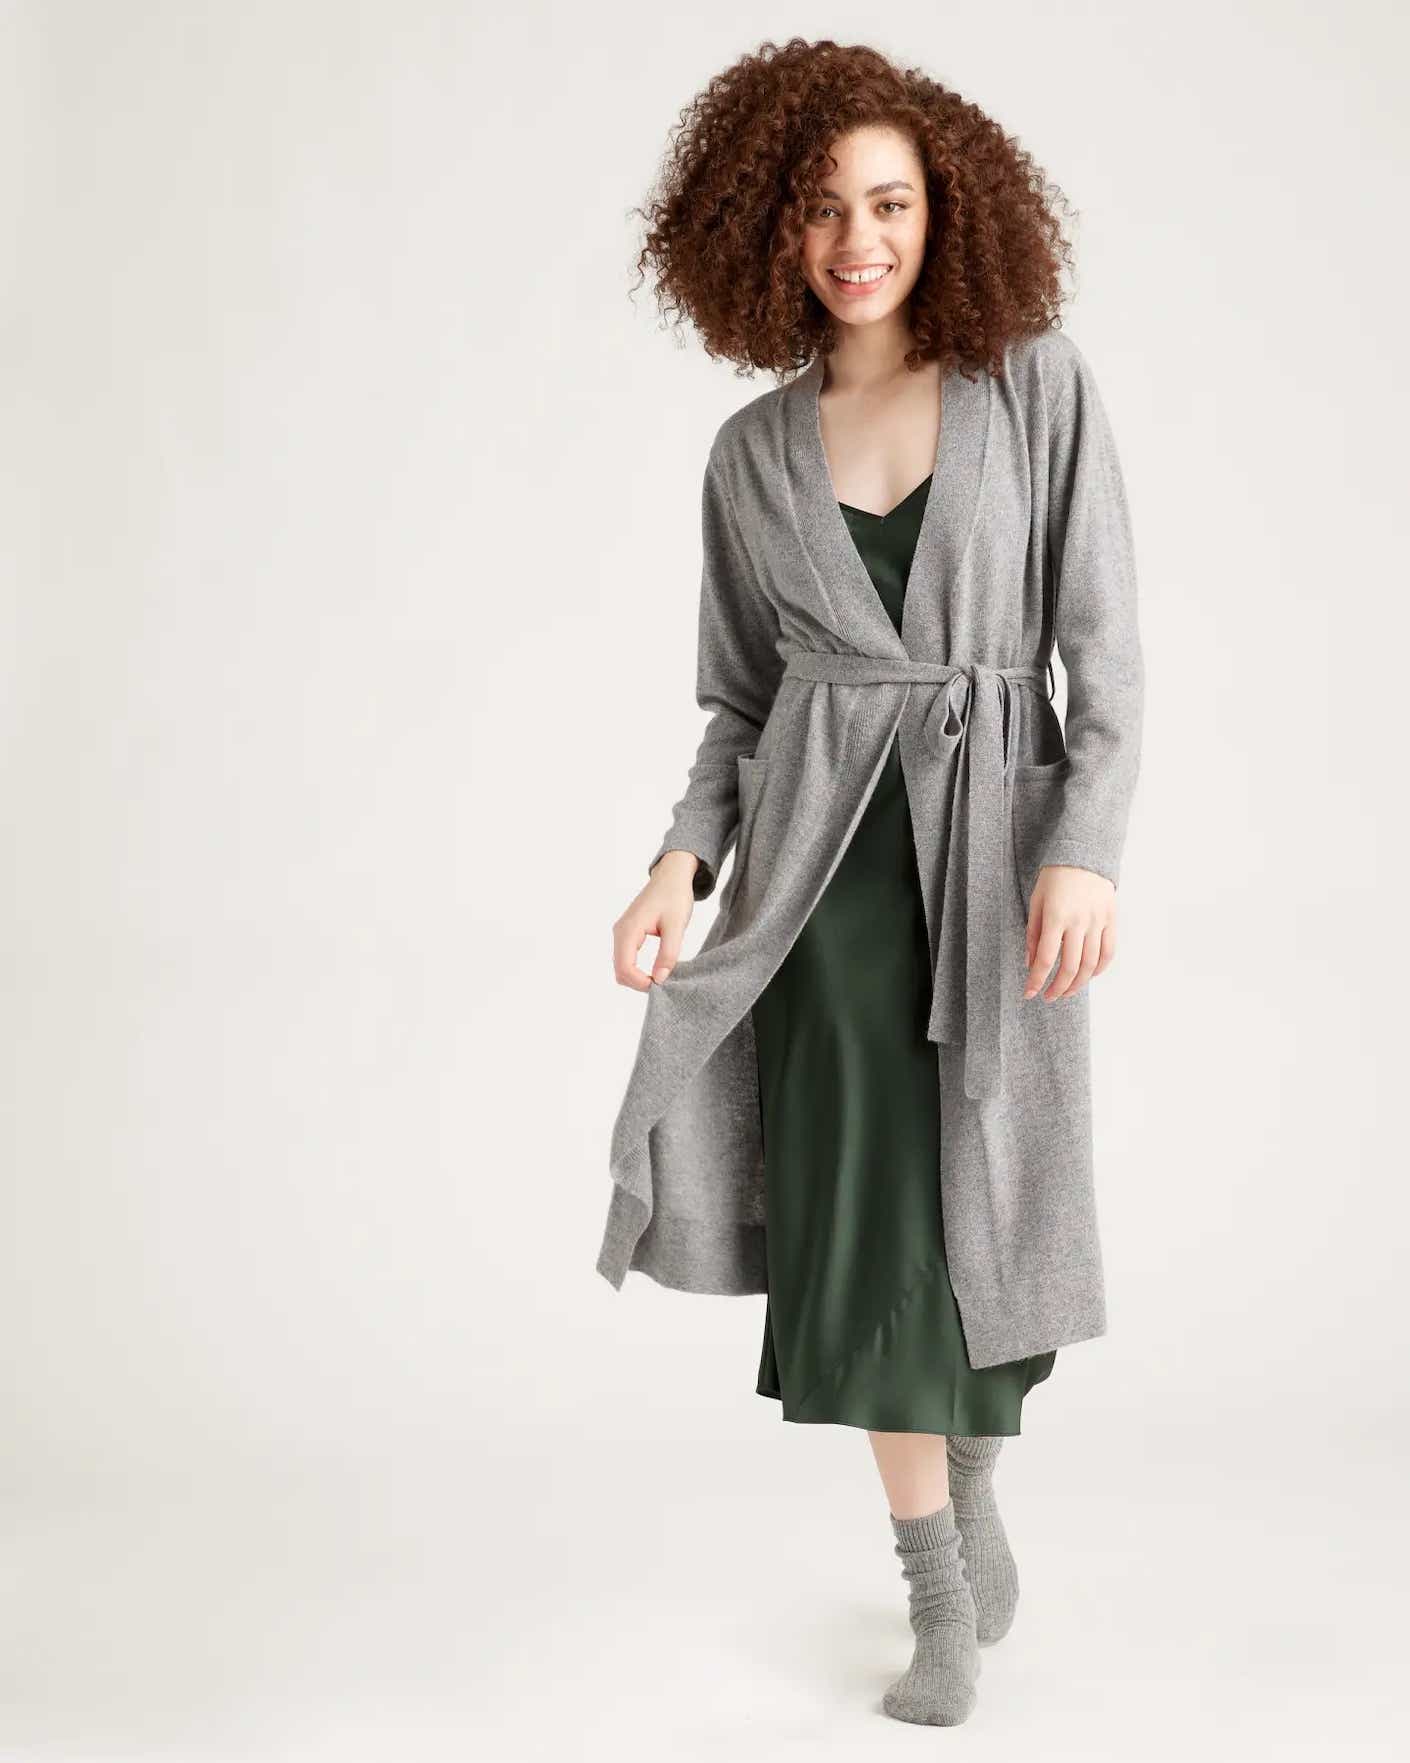 A woman smiles as she steps forward in a light grey, mid weight, cashmere robe that falls to her shins.